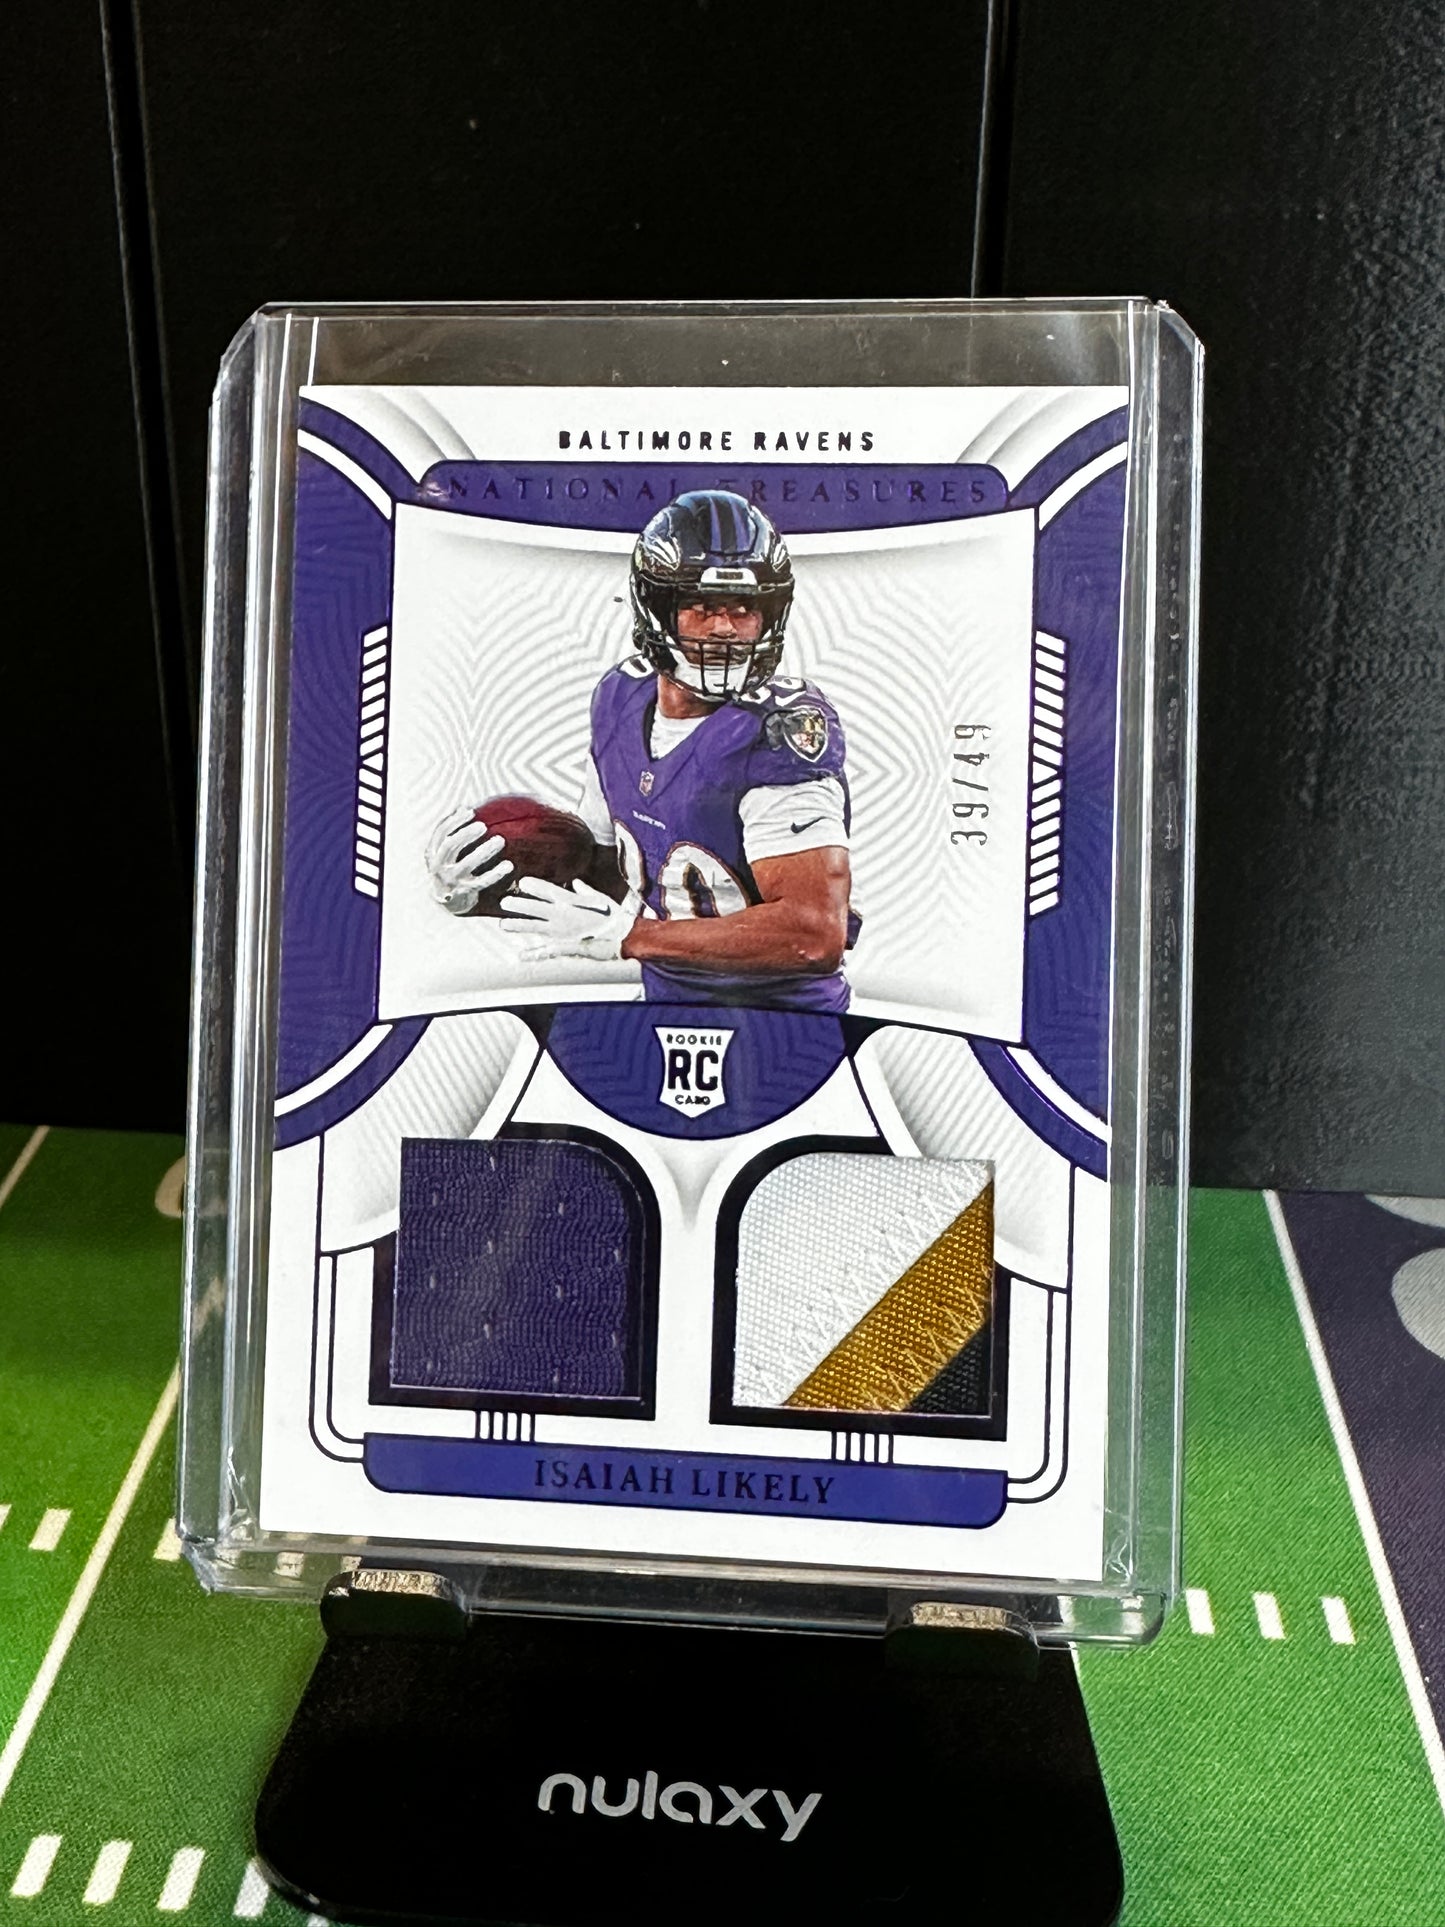 2022 PANINI NATIONAL TREASURES Isaiah Likely RC Dual Patch /49 Baltimore Ravens